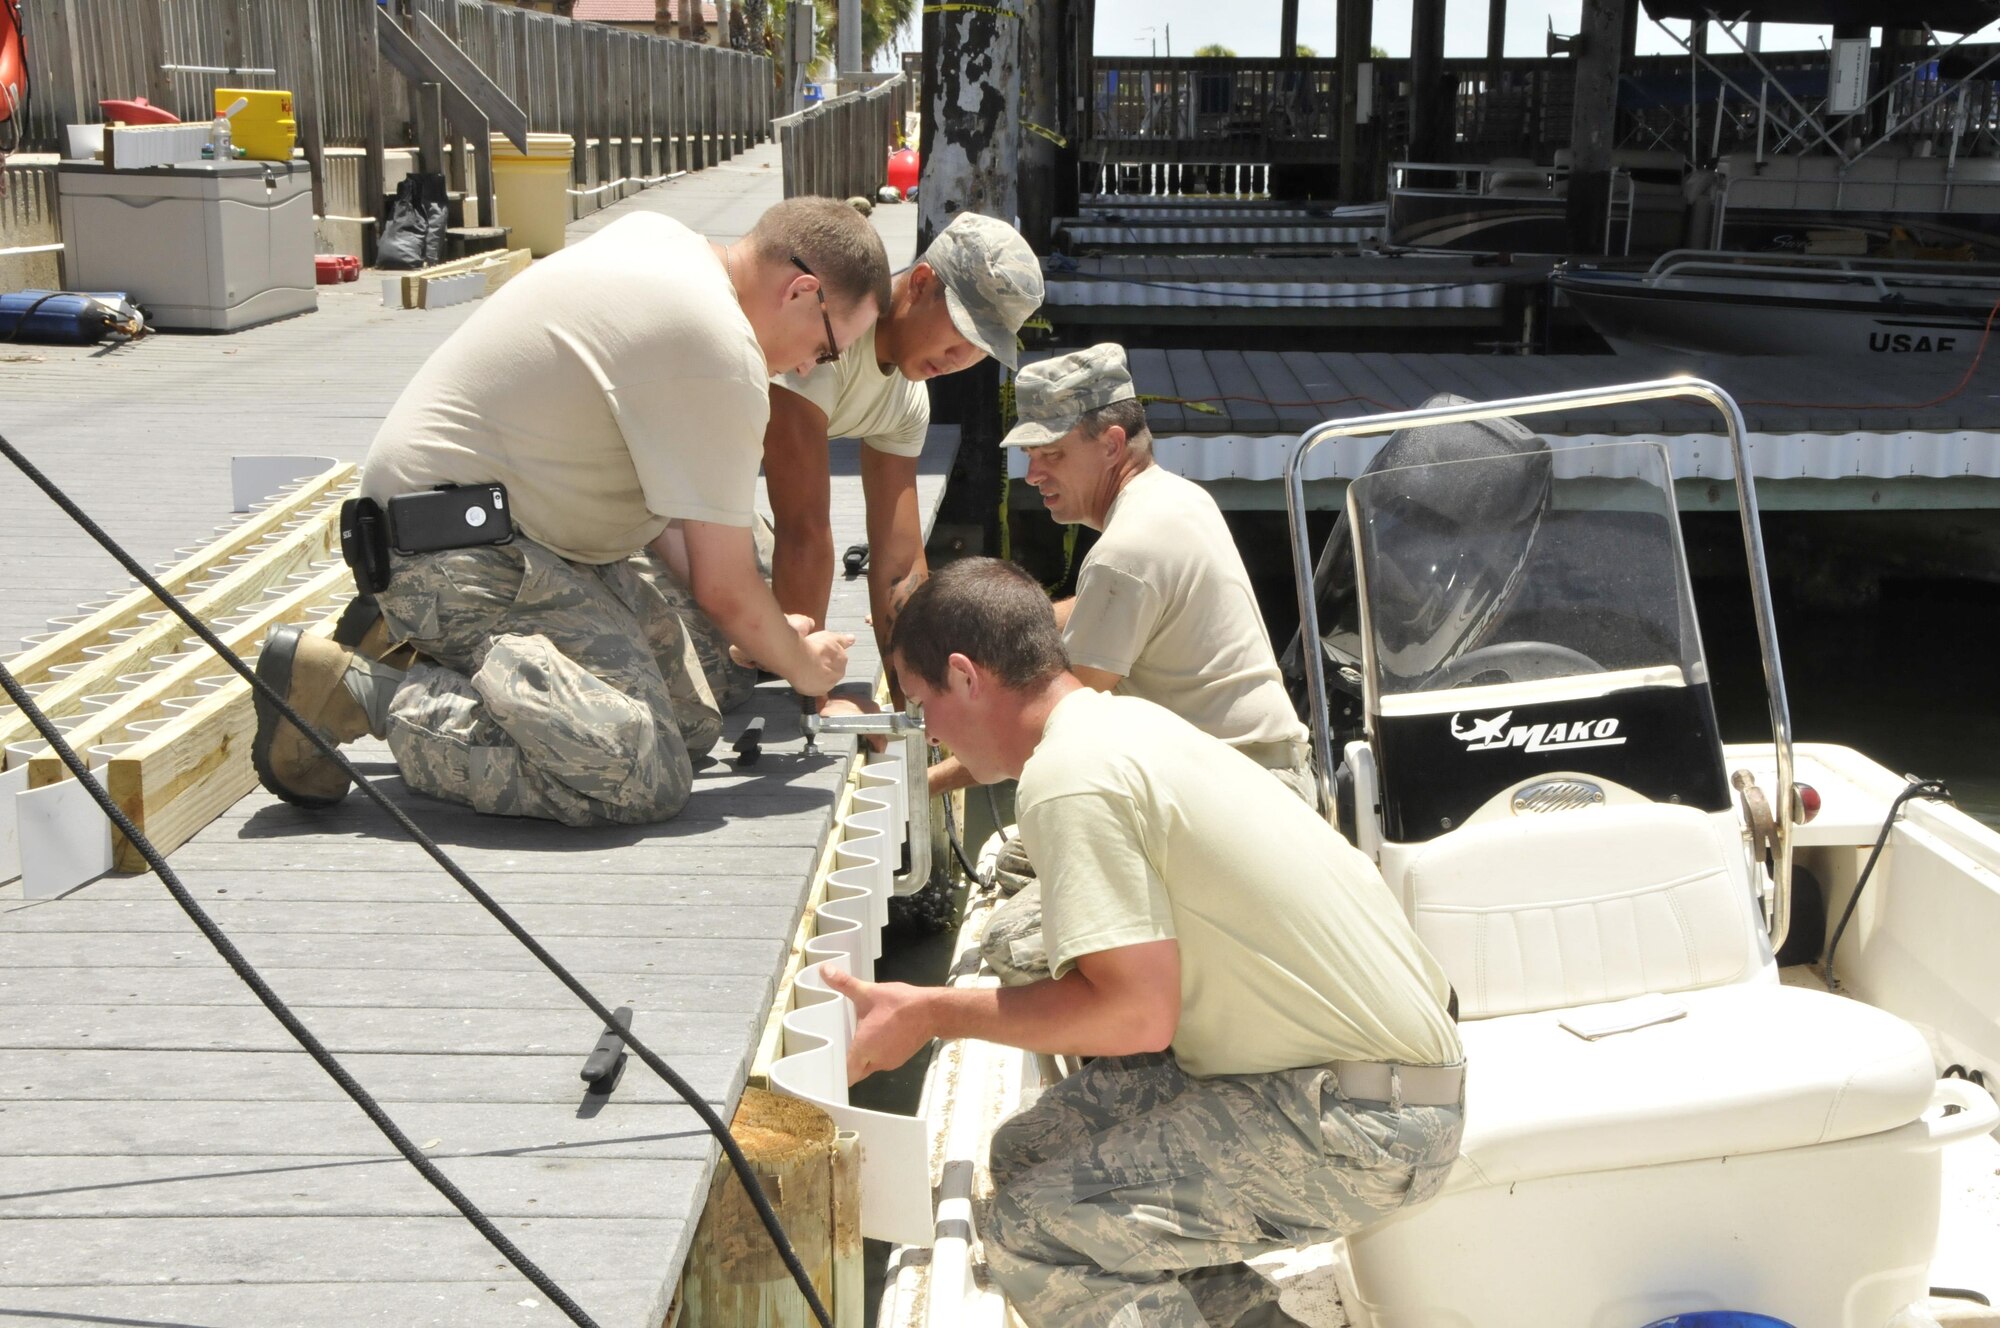 U.S. Airmen with the 181st Intelligence Wing Civil Engineering Squadron and 45th Space Wing Civil Engineering Squadron work together to install new dock fenders at the outdoor marina at Patrick Air Force Base, July 20, 2016. (U.S. Air National Guard photo by Senior Master Sgt. John S. Chapman)